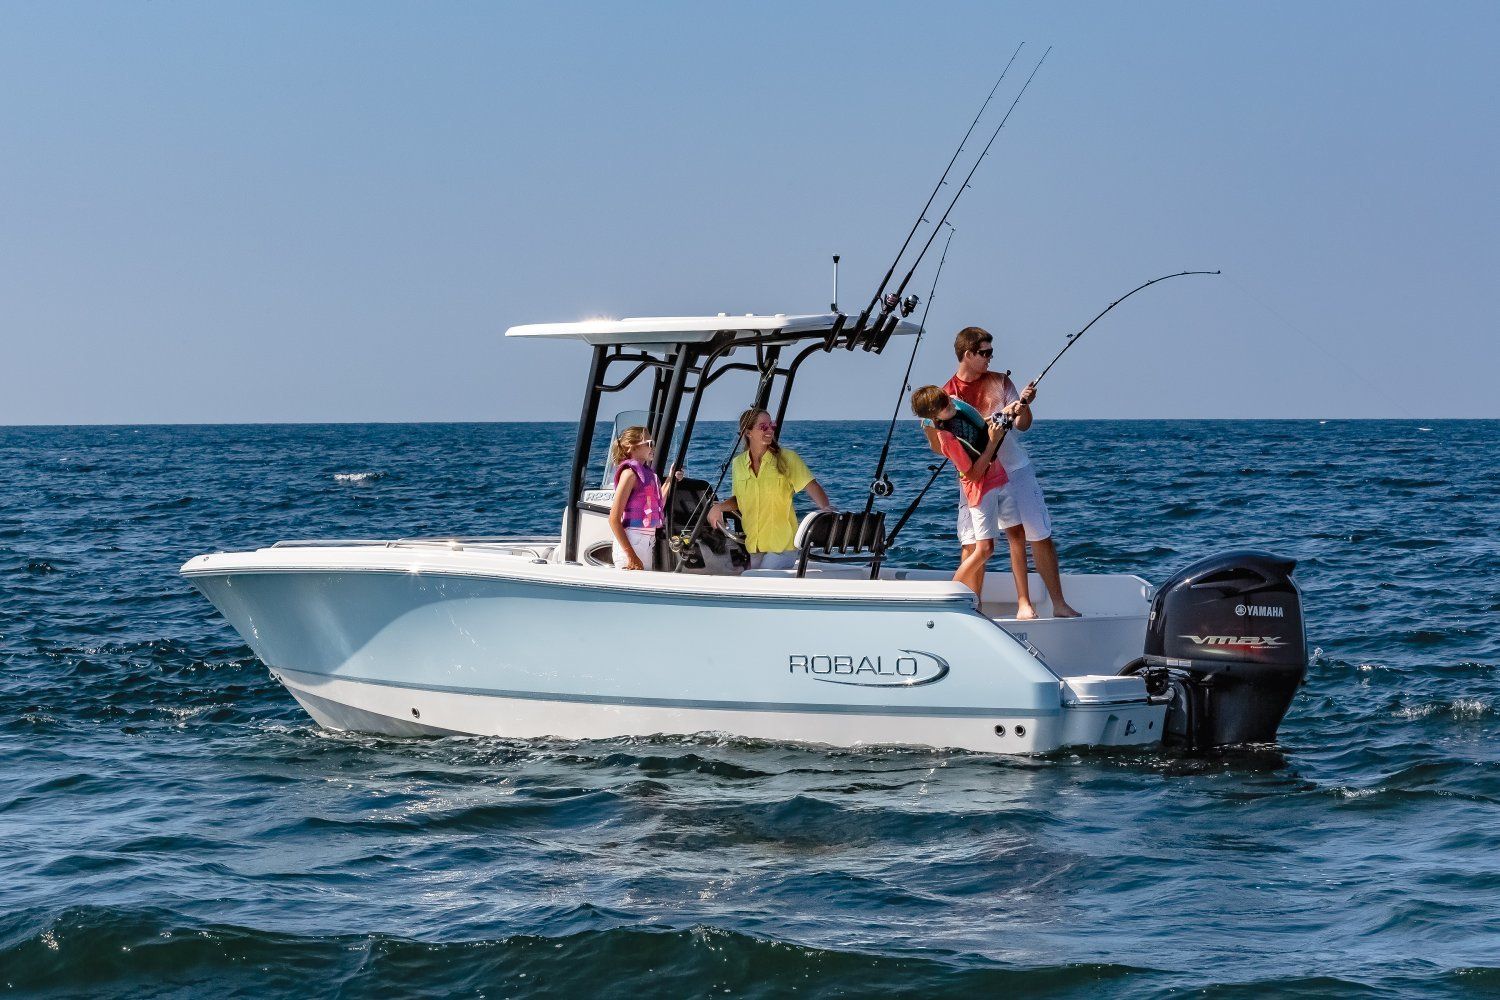 Image Robalo Center Console Boats: The R230 A family of four, with the dad and the son fishing, all on a Robalo R230